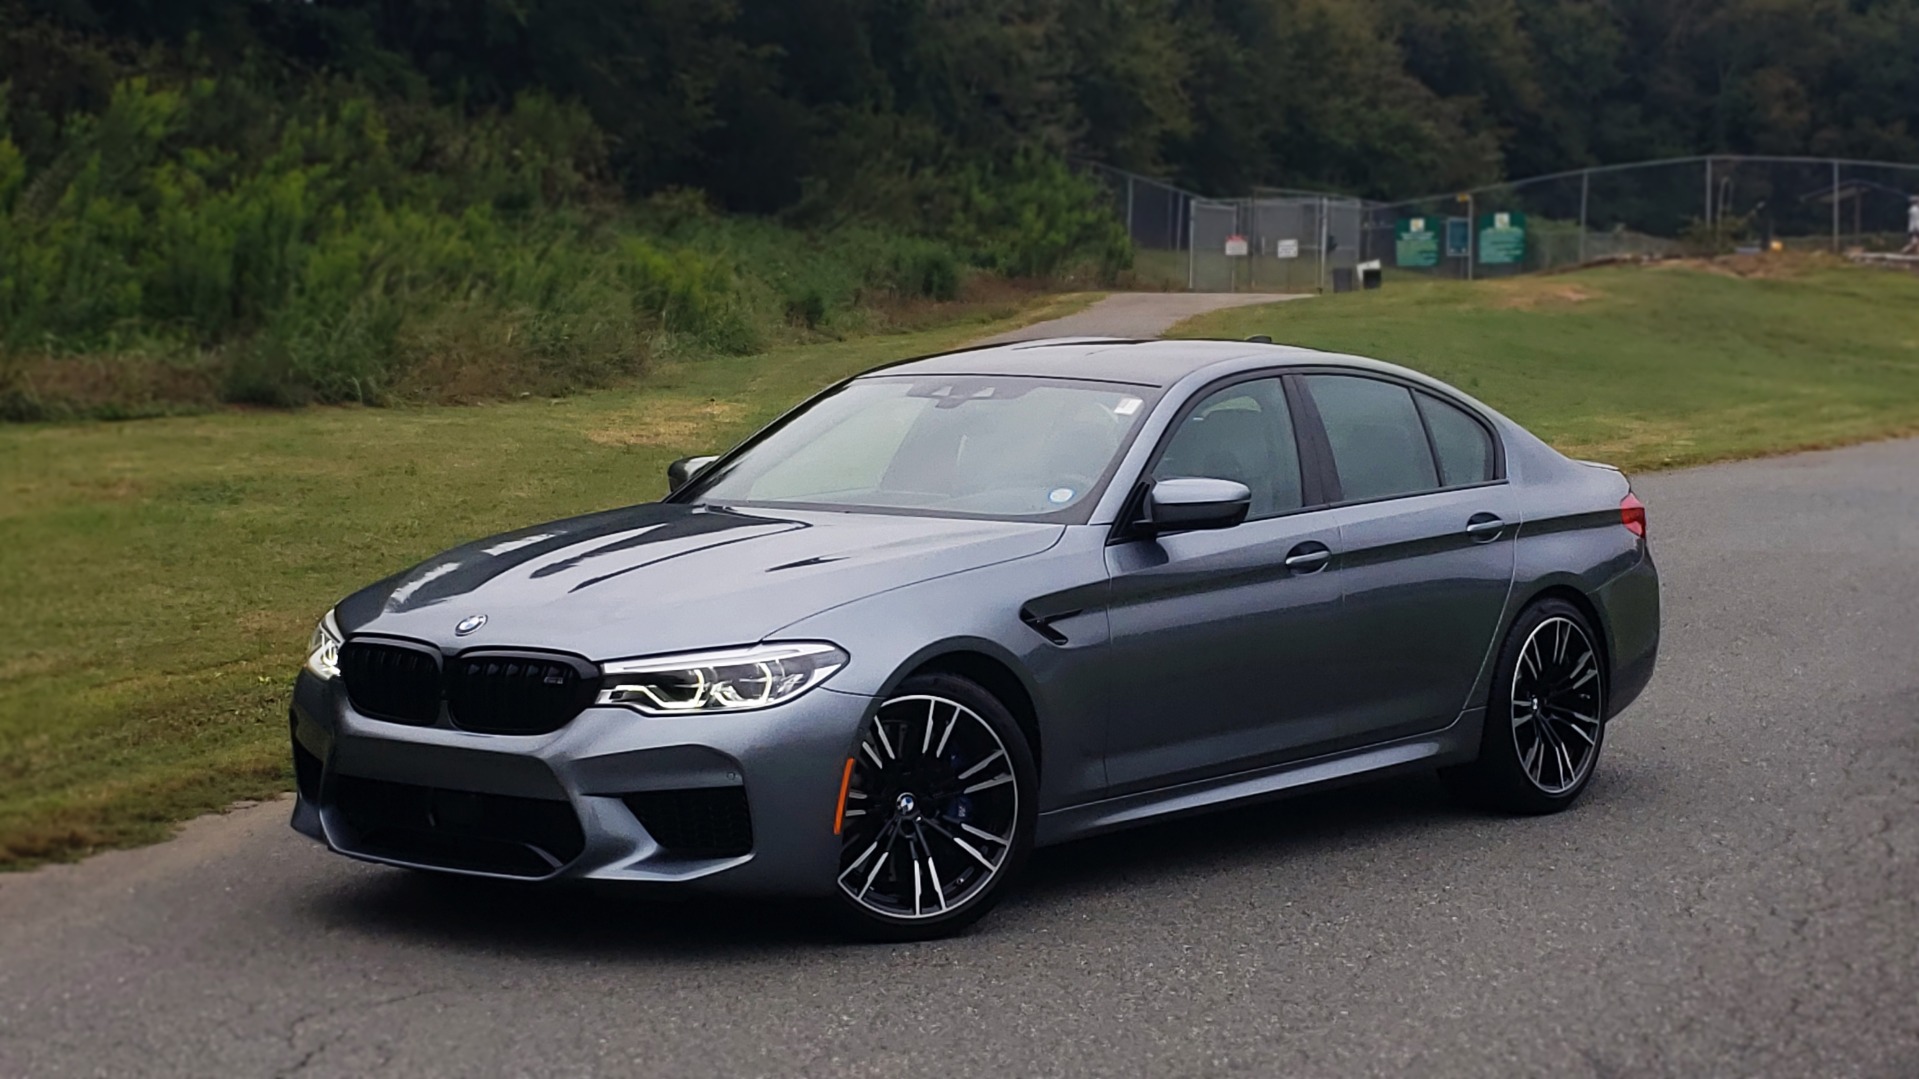 Used 2019 BMW M5 EXEC PKG / DRVR ASST PLUS / B&W SOUND / NAV / REARVIEW for sale Sold at Formula Imports in Charlotte NC 28227 5